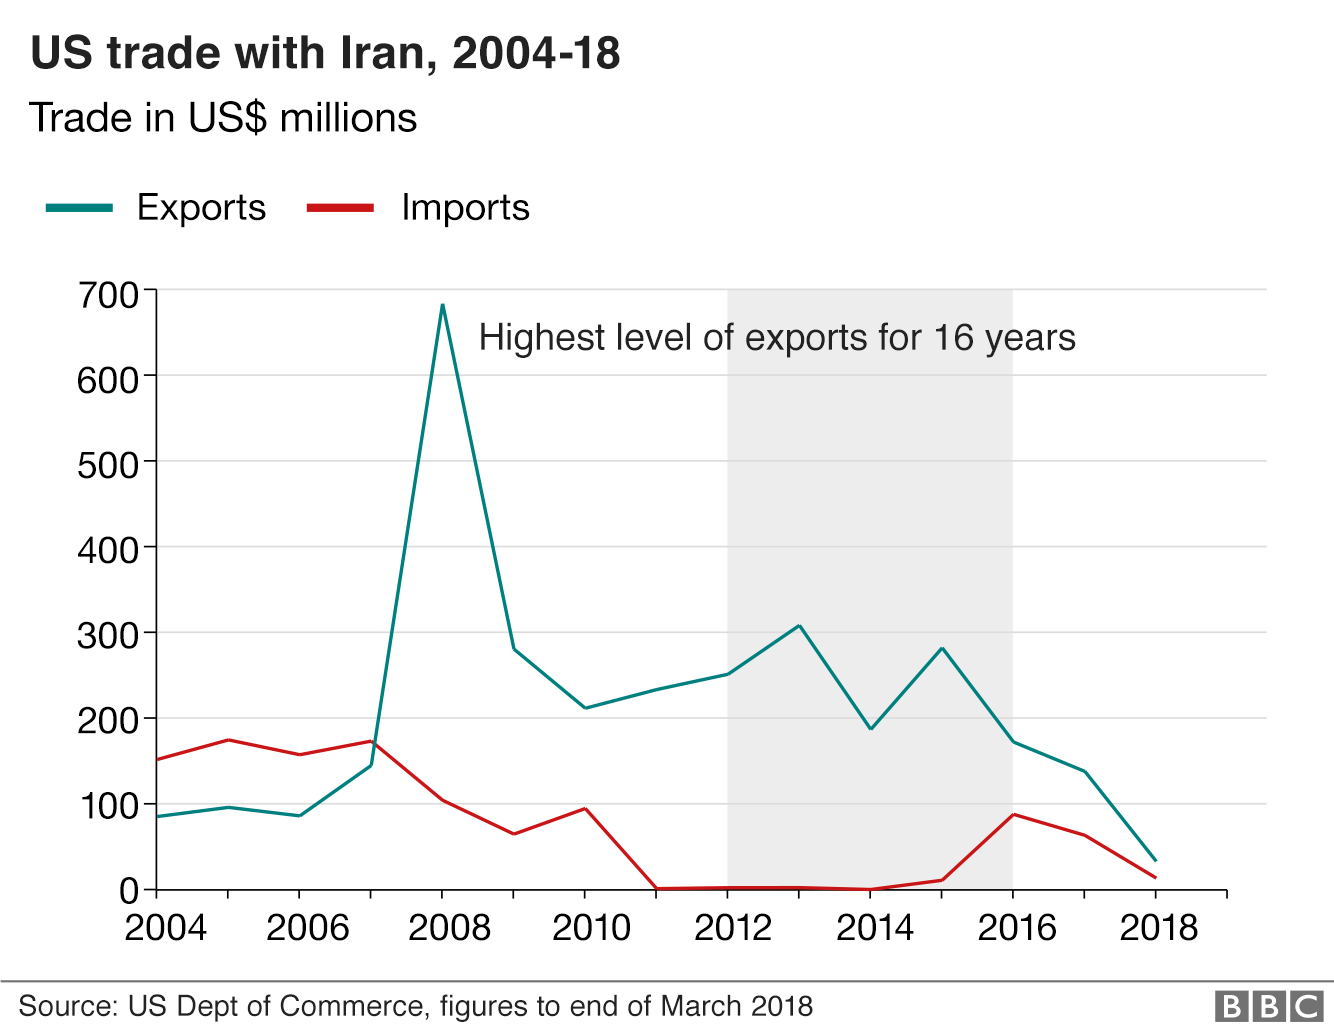 Graph showing value of US trade with Iran between 2004-18